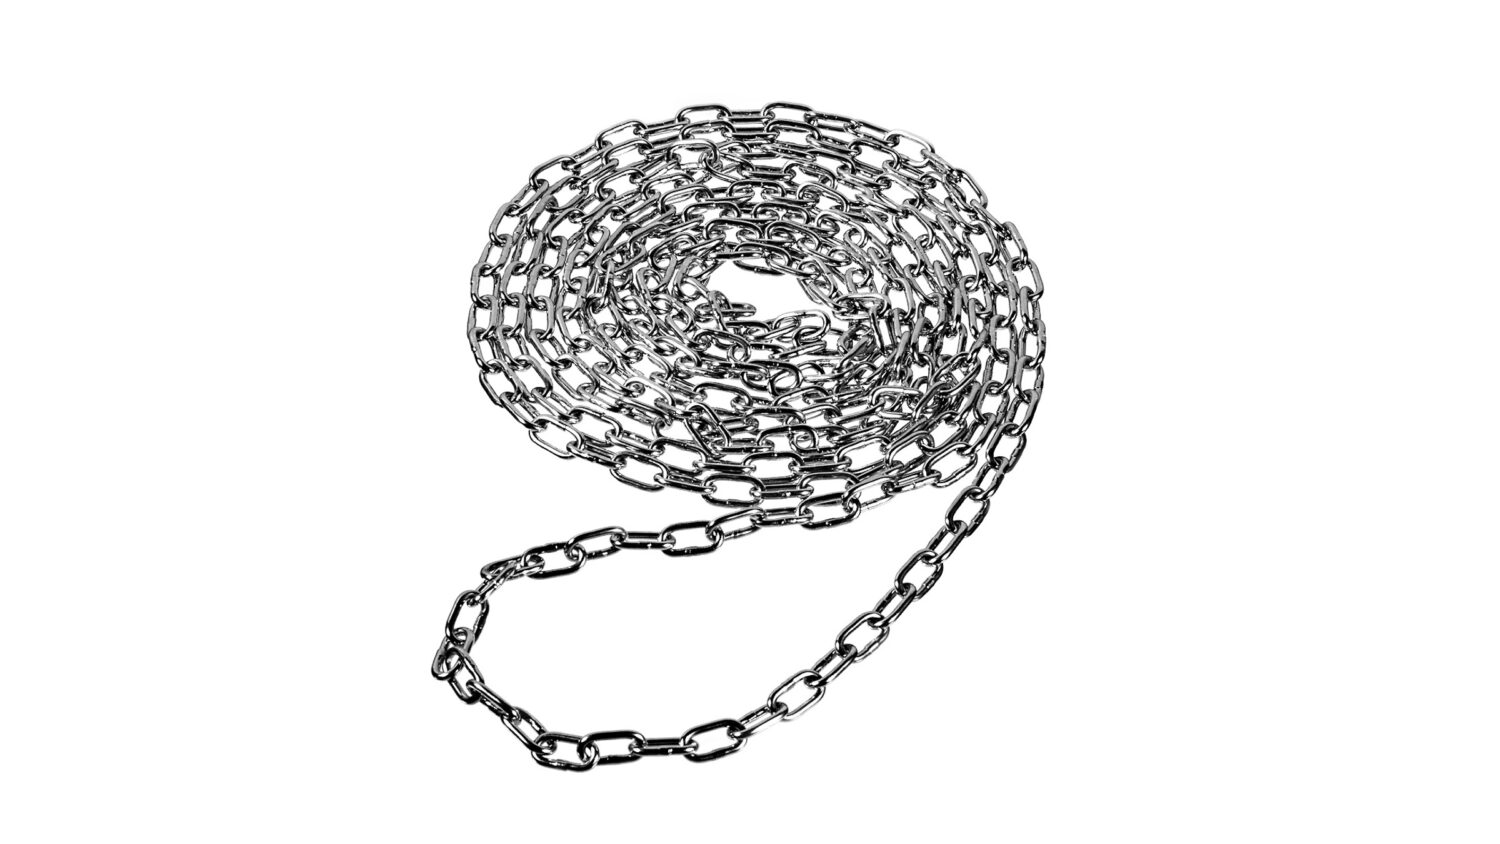 FOBA chain for background papers